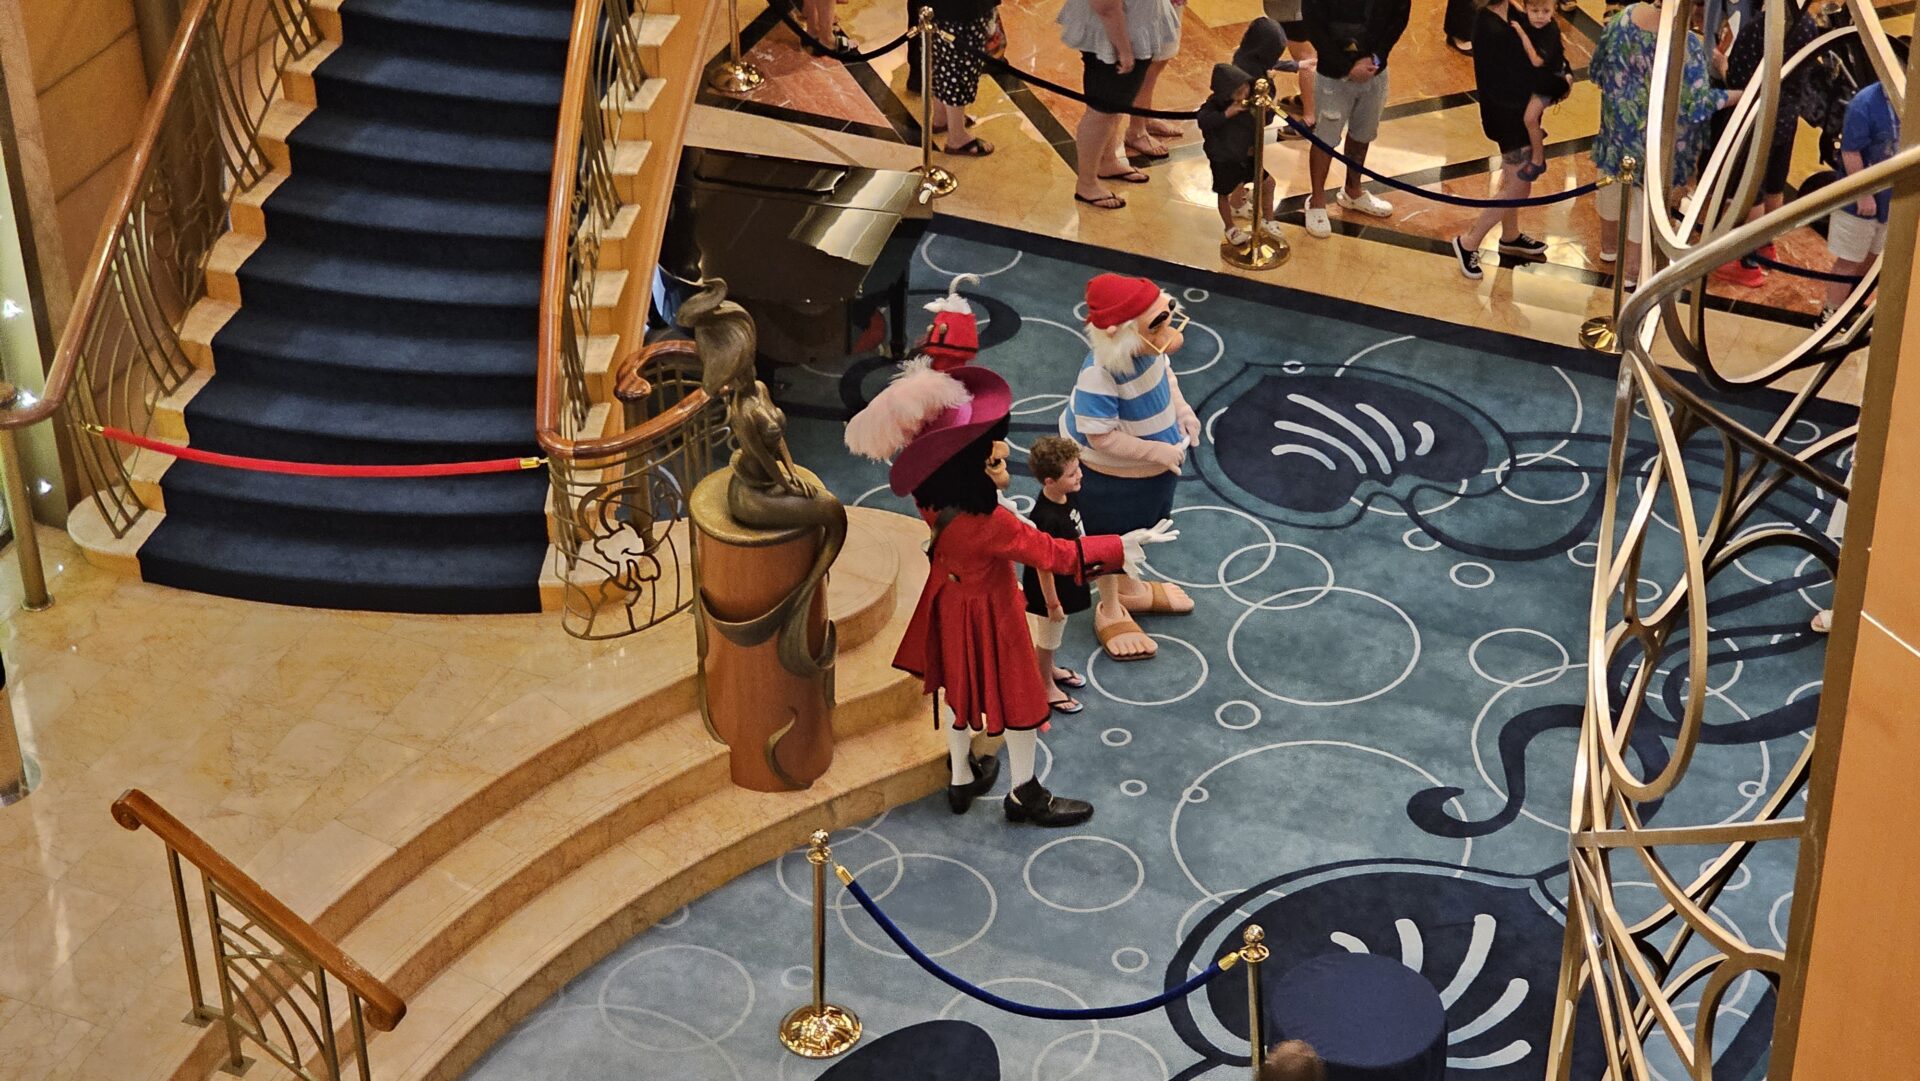 Meet and Greet - Hook and Smee